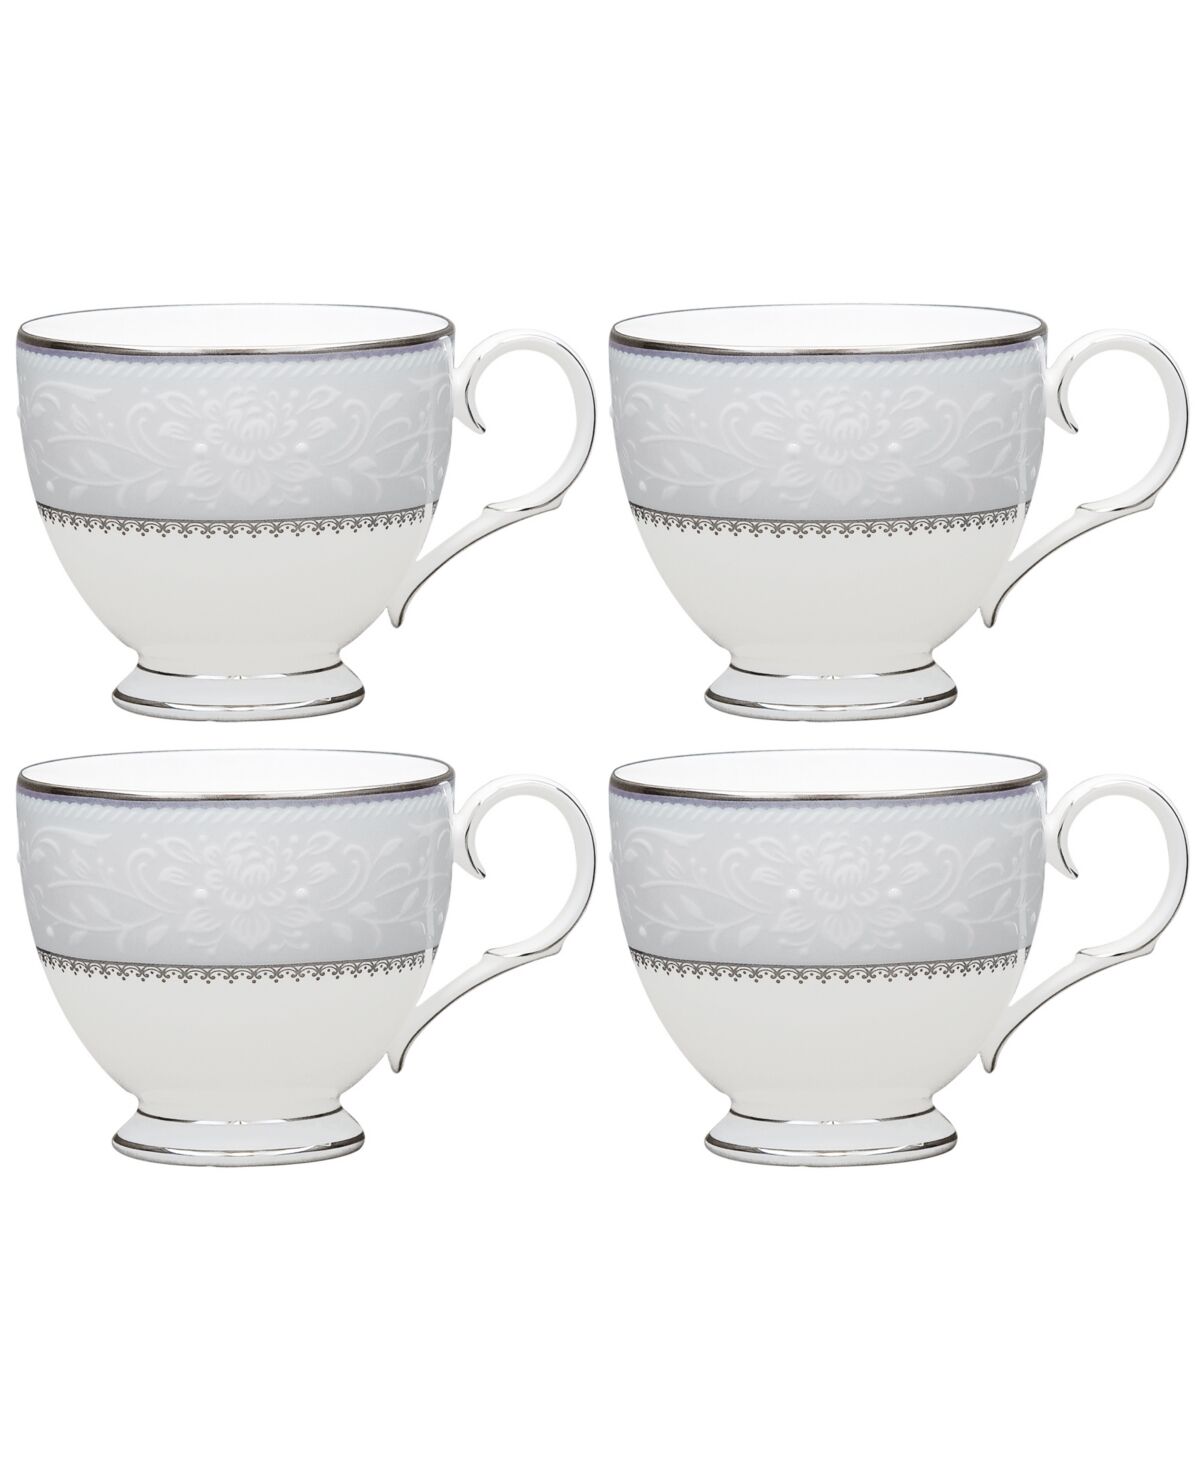 Noritake Brocato Set of 4 Cups, Service For 4 - Gray